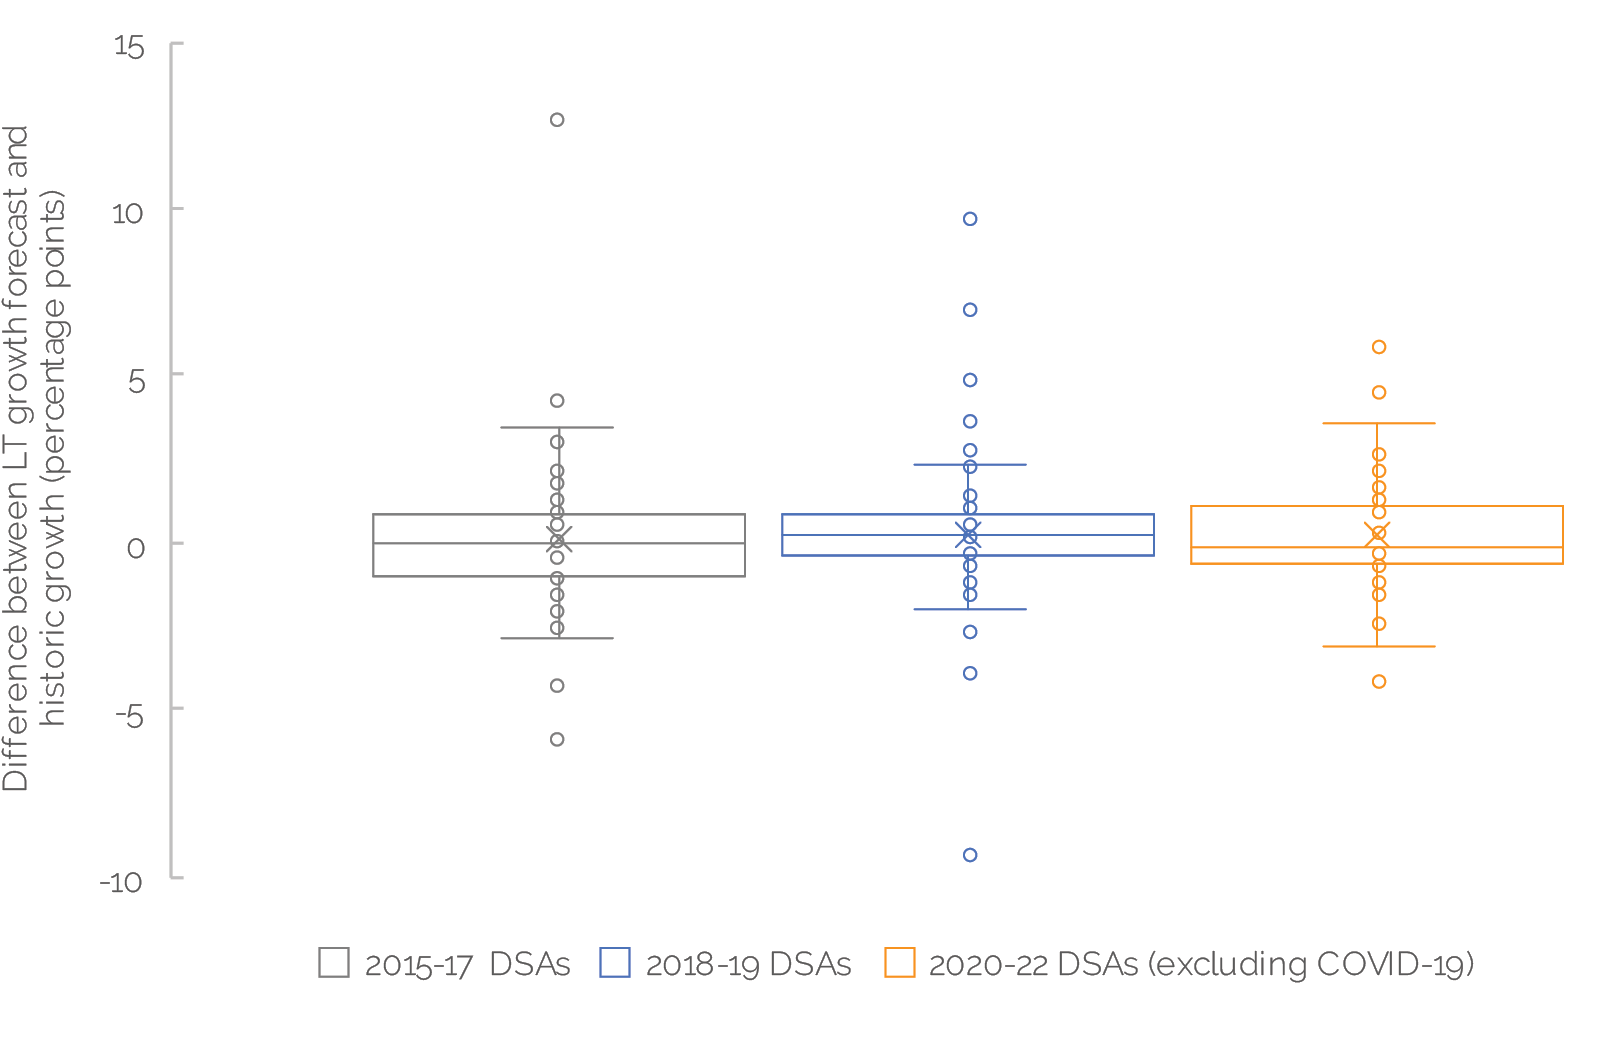 Box plot showing the distribution of the difference between long term GDP growth forecasts and historical growth over time.